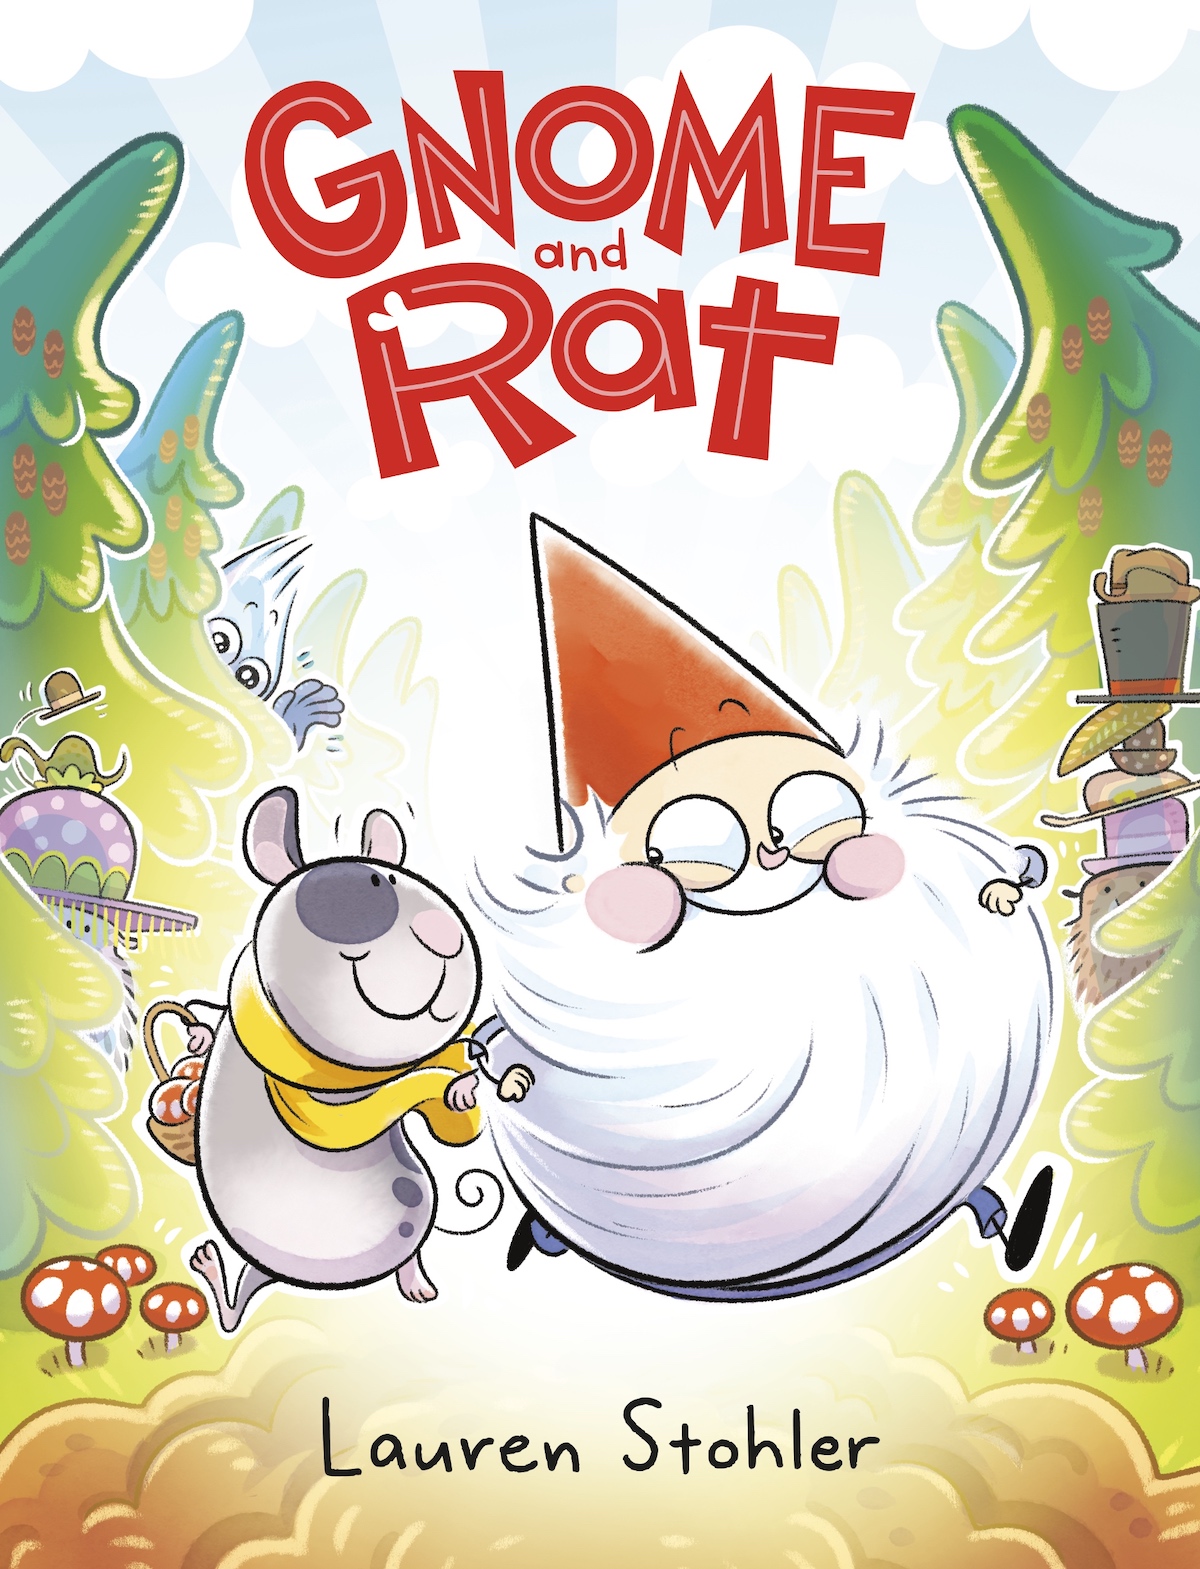 Gnome and Rat by Lauren Stohler